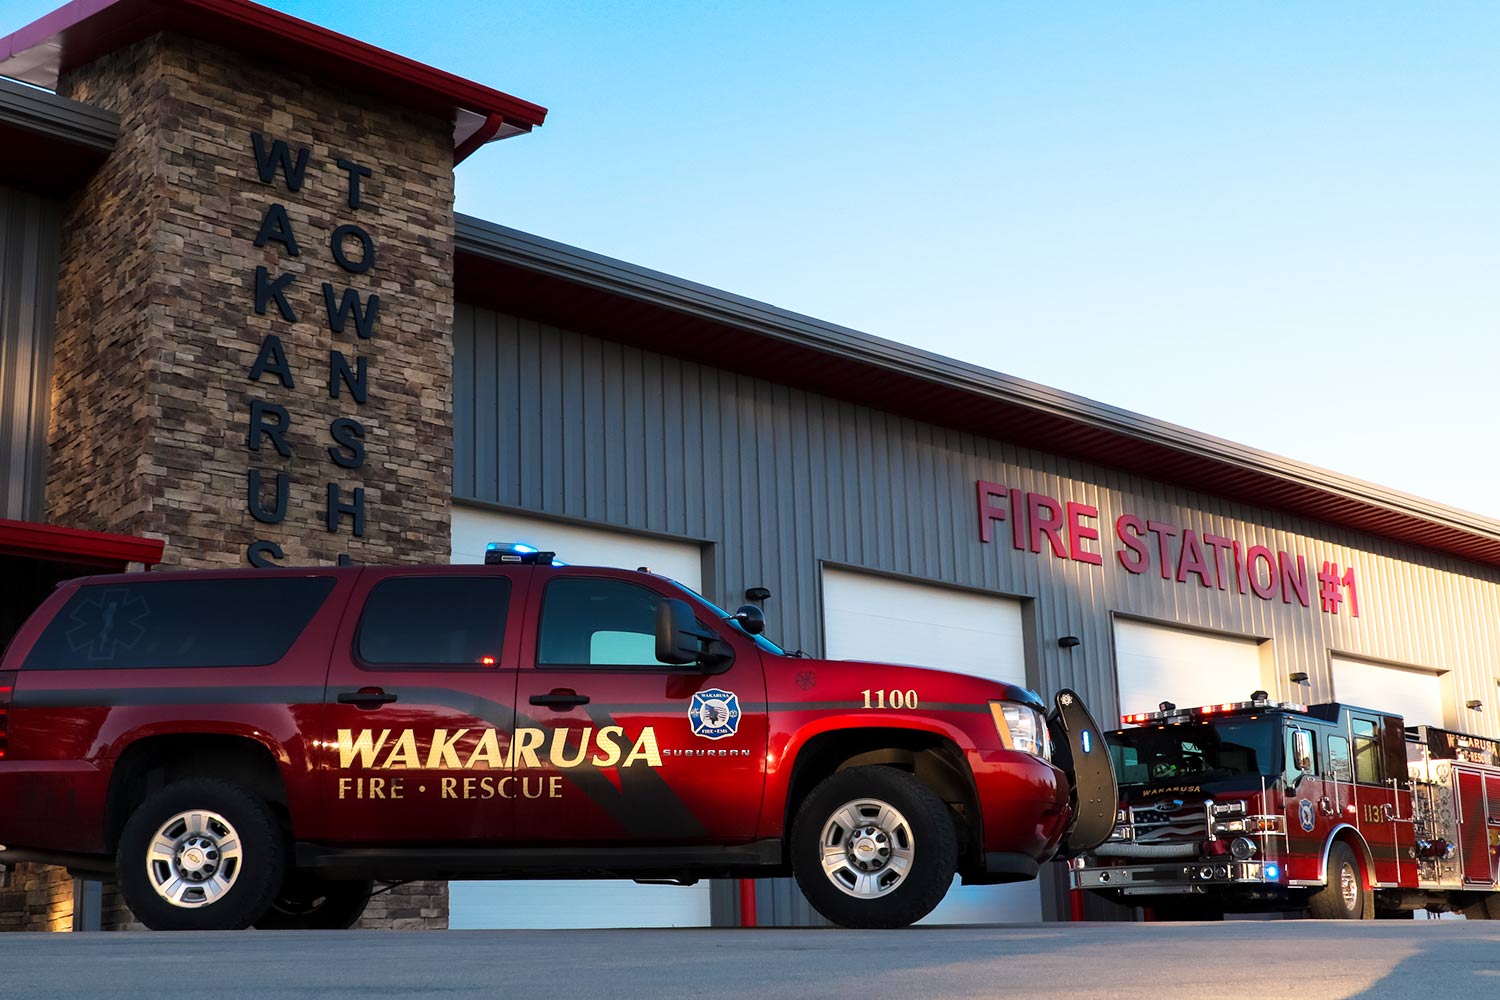 Wakarusa Township fire station meets innovation